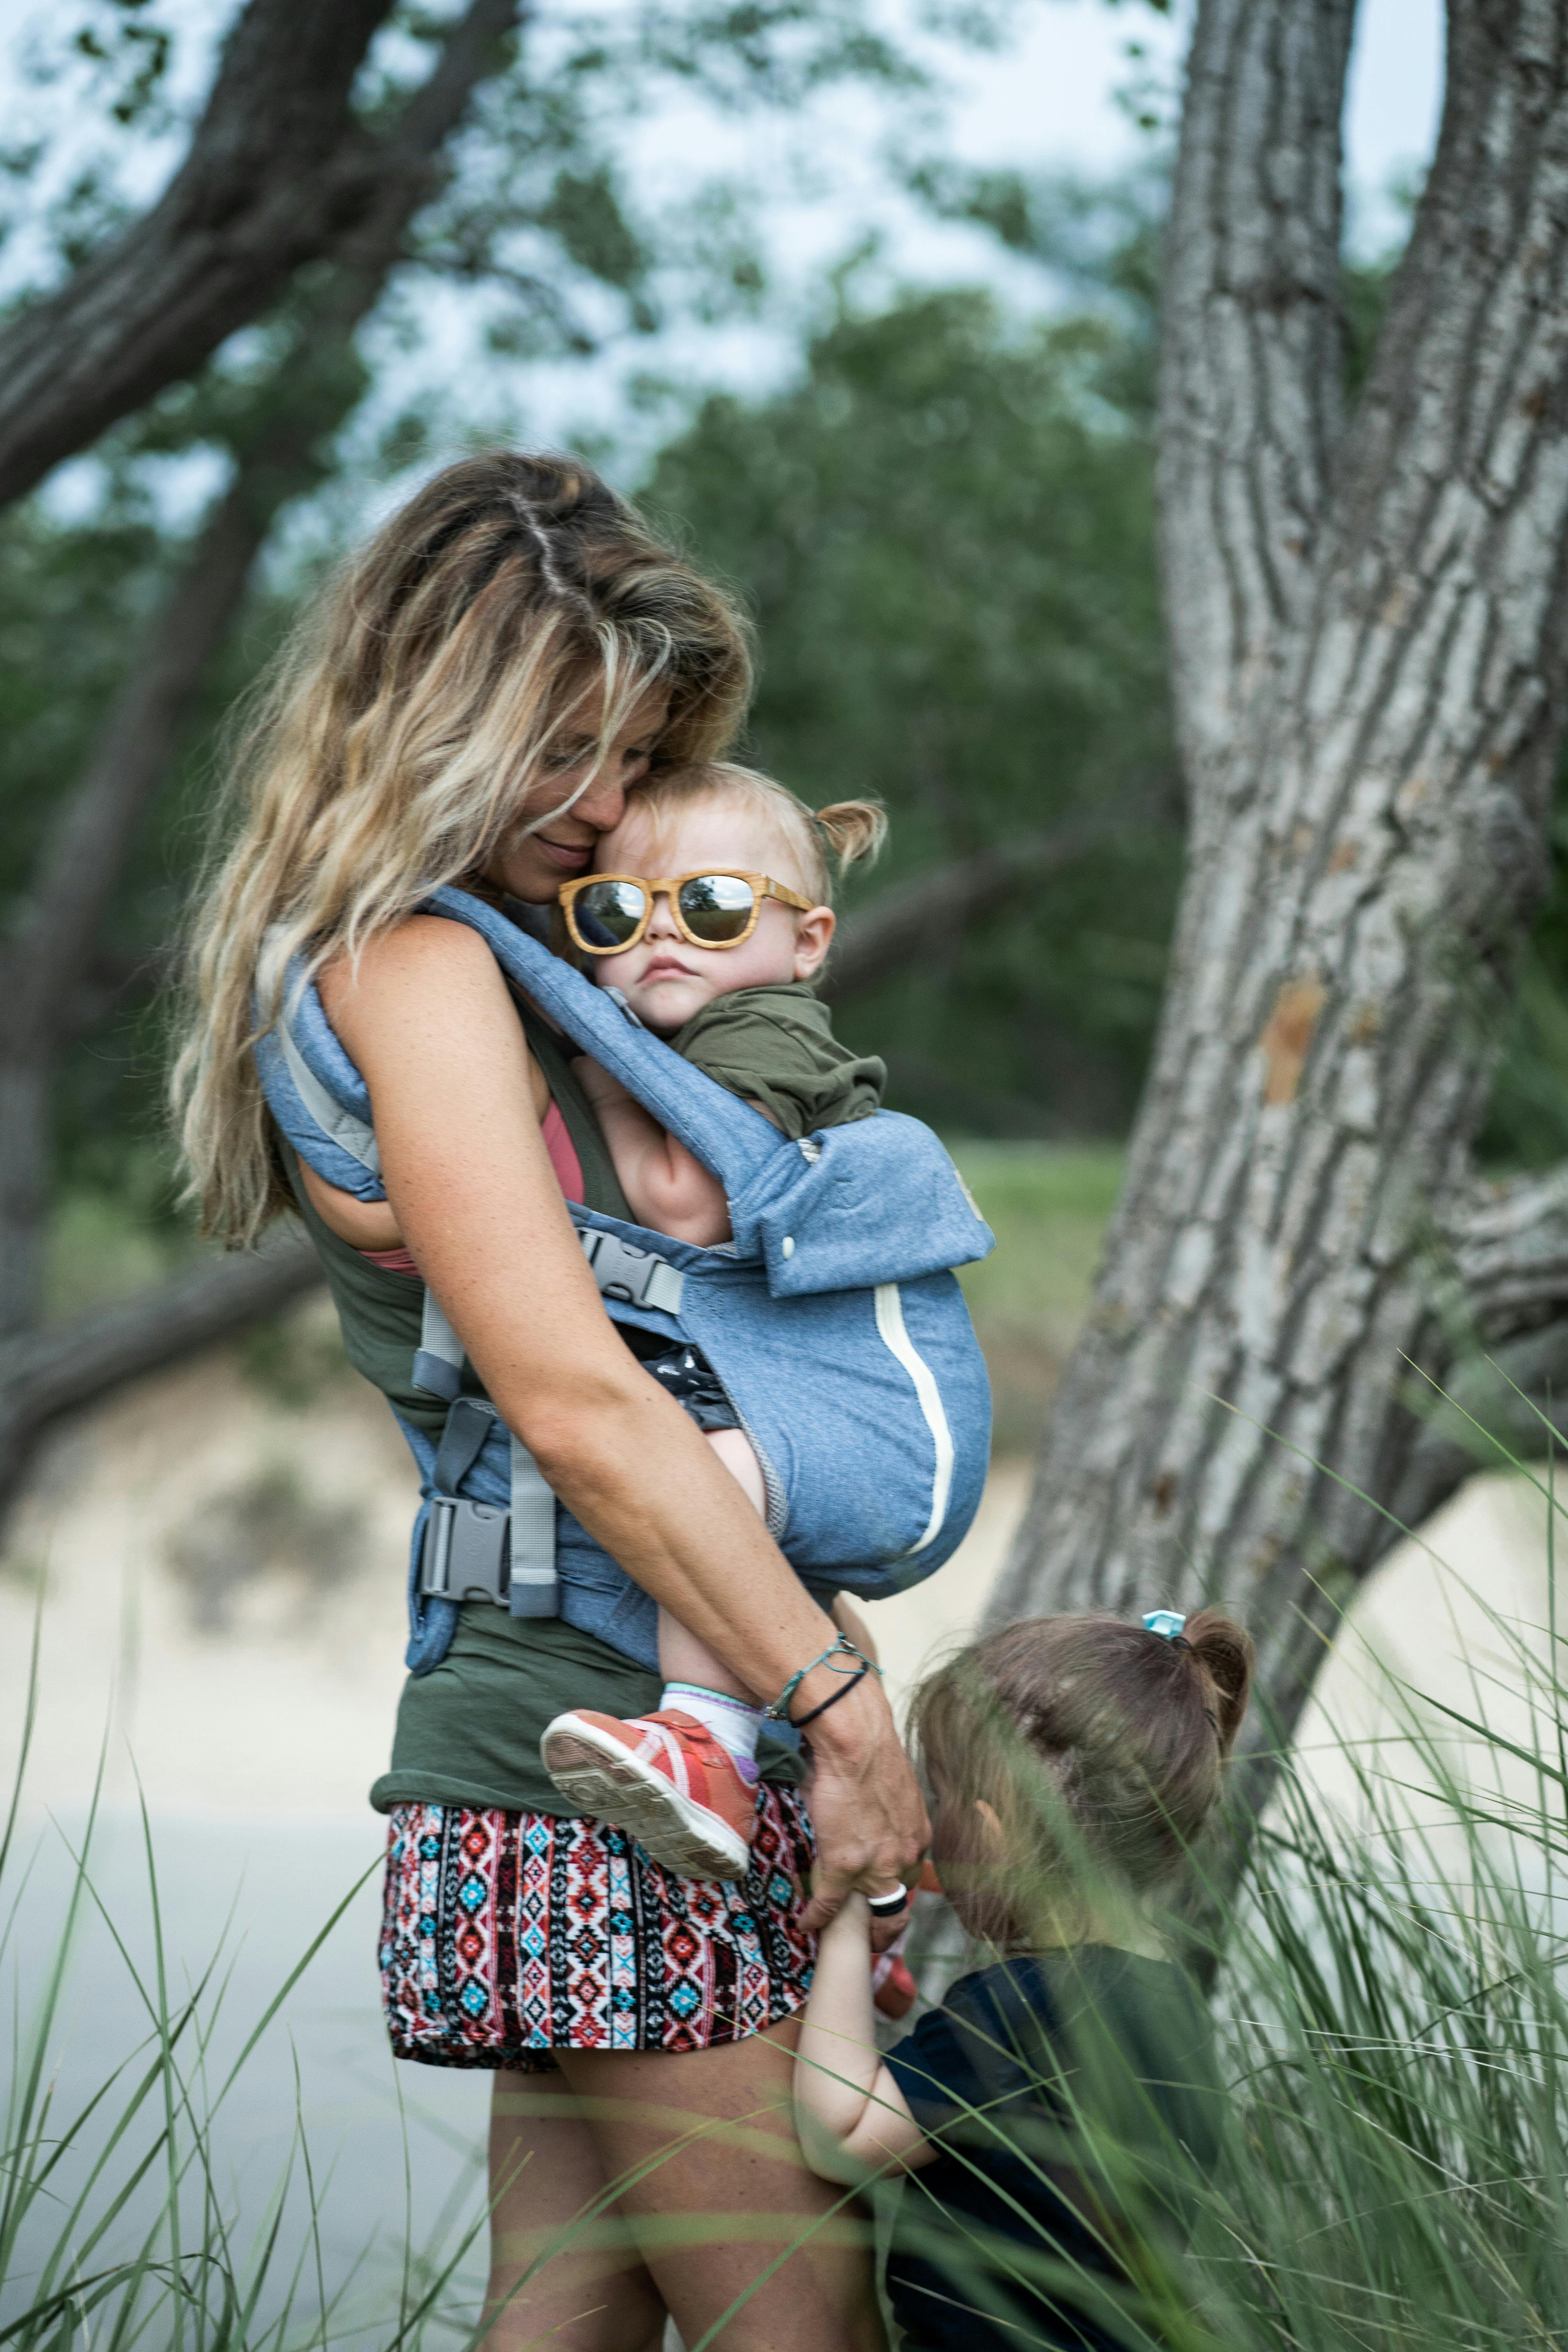 Woman carrying a little girl. | Photo: Pexels